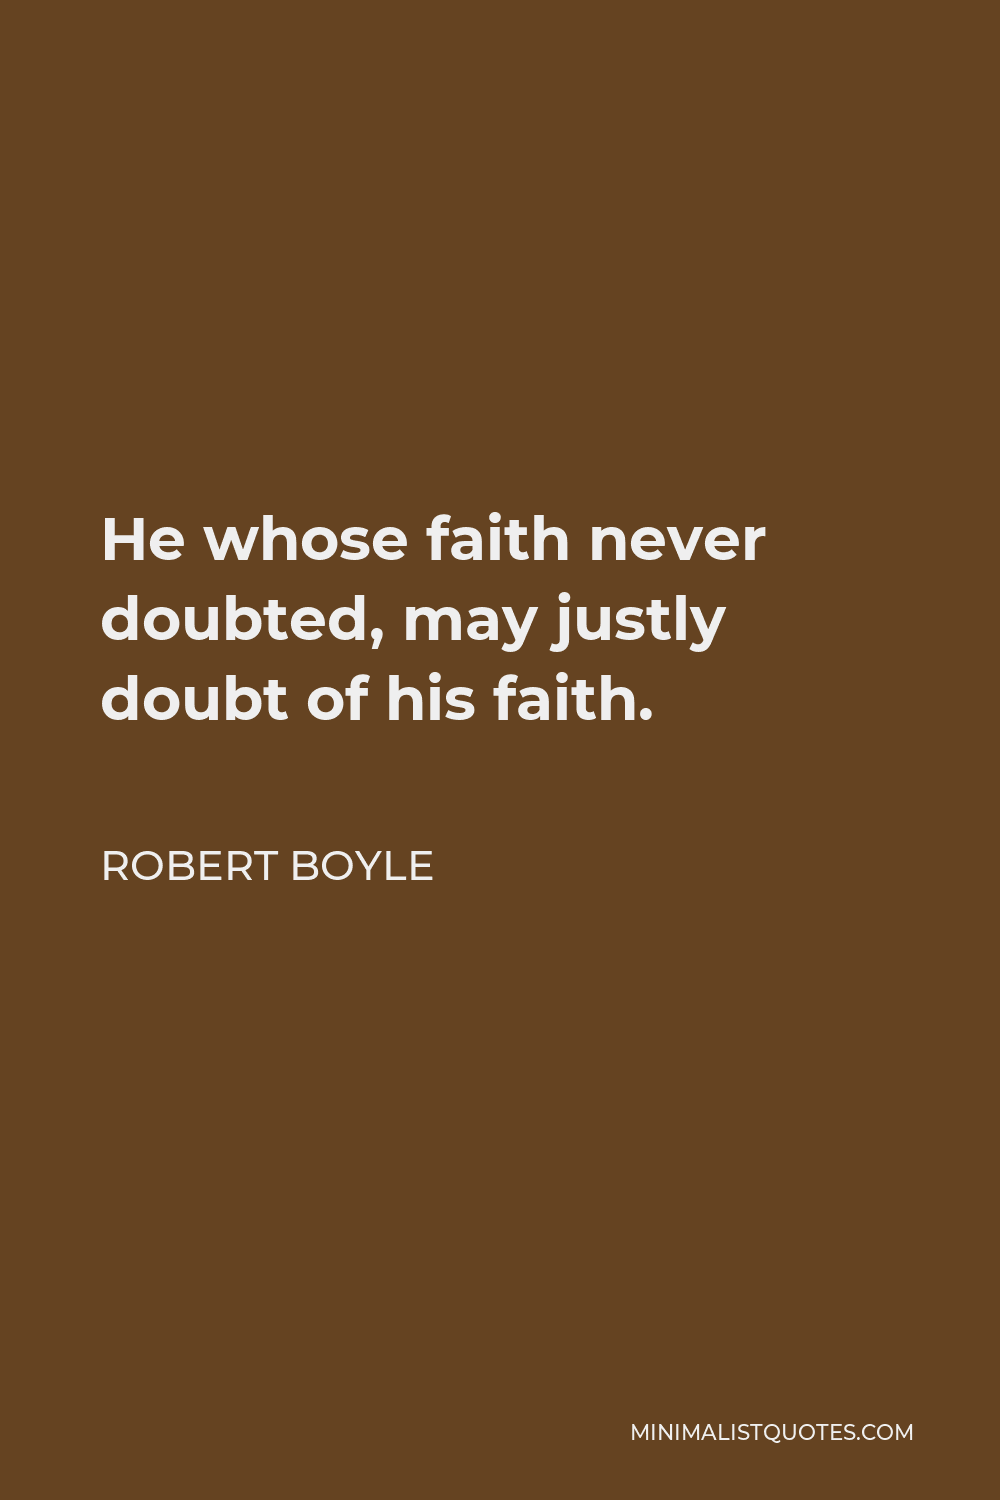 Robert Boyle Quote - He whose faith never doubted, may justly doubt of his faith.